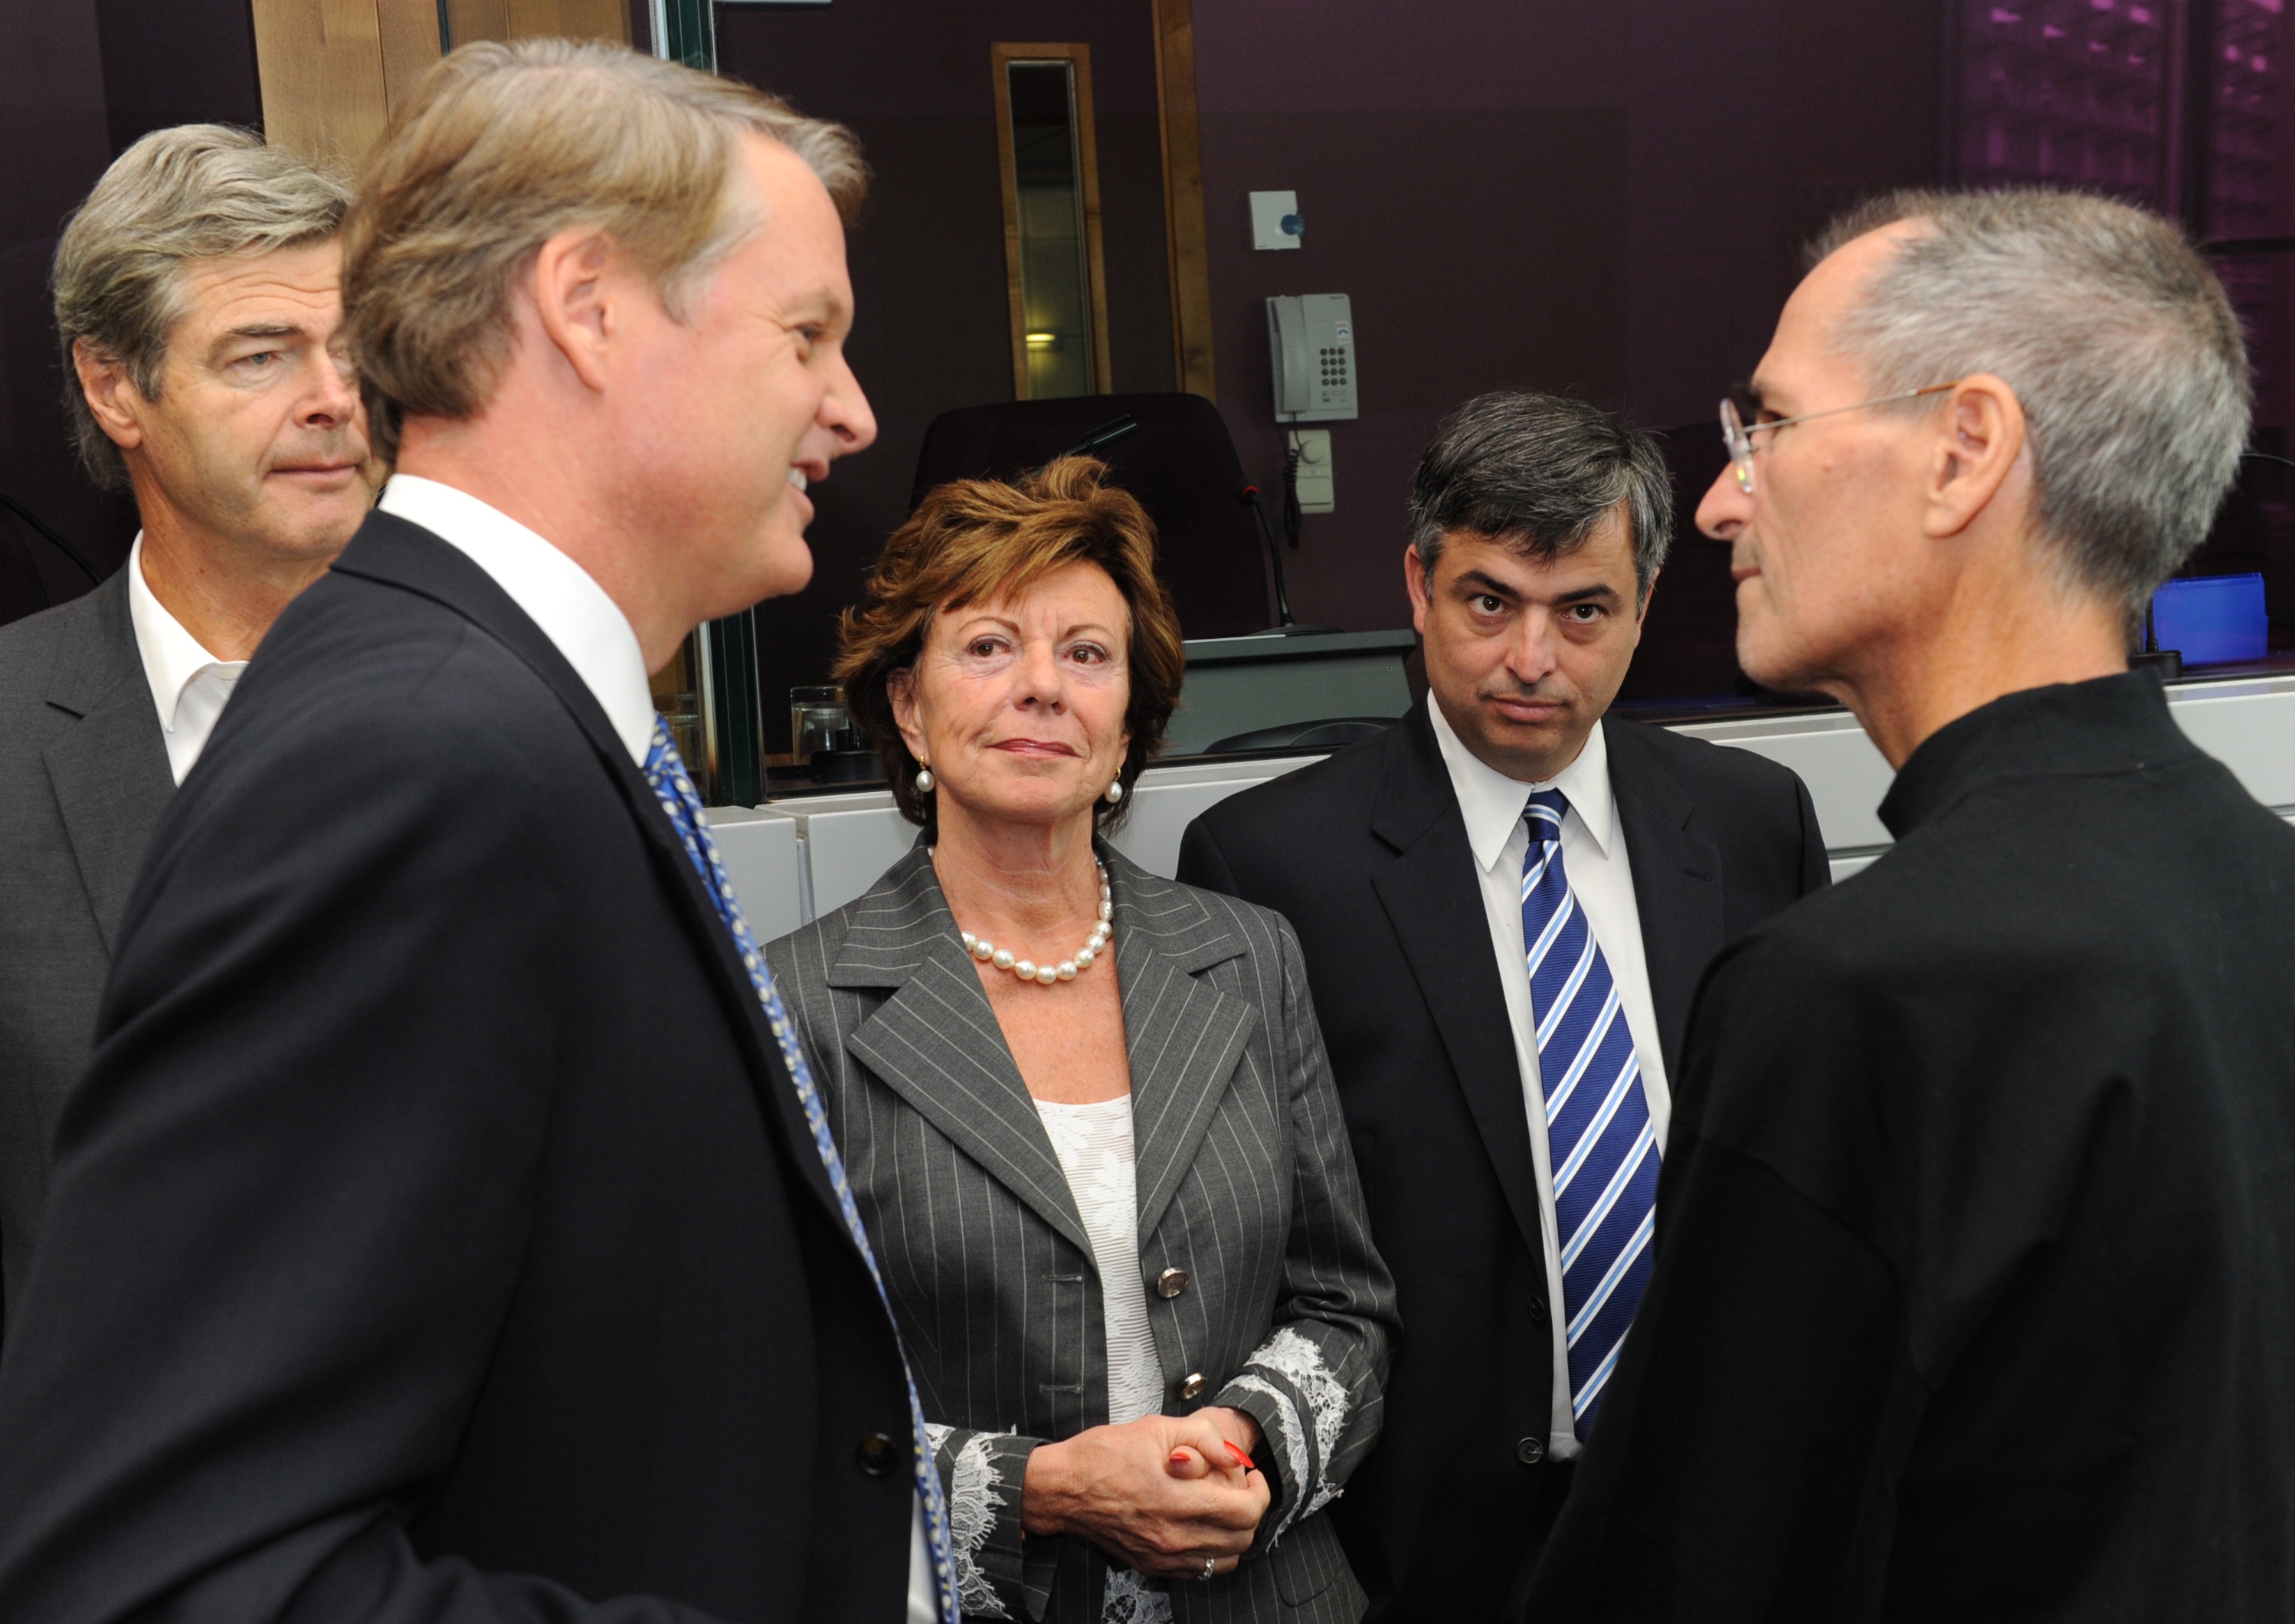 Eddy Cue (second to the right) and Steve Jobs (far right) at the European Commission, 17 Sep 2008